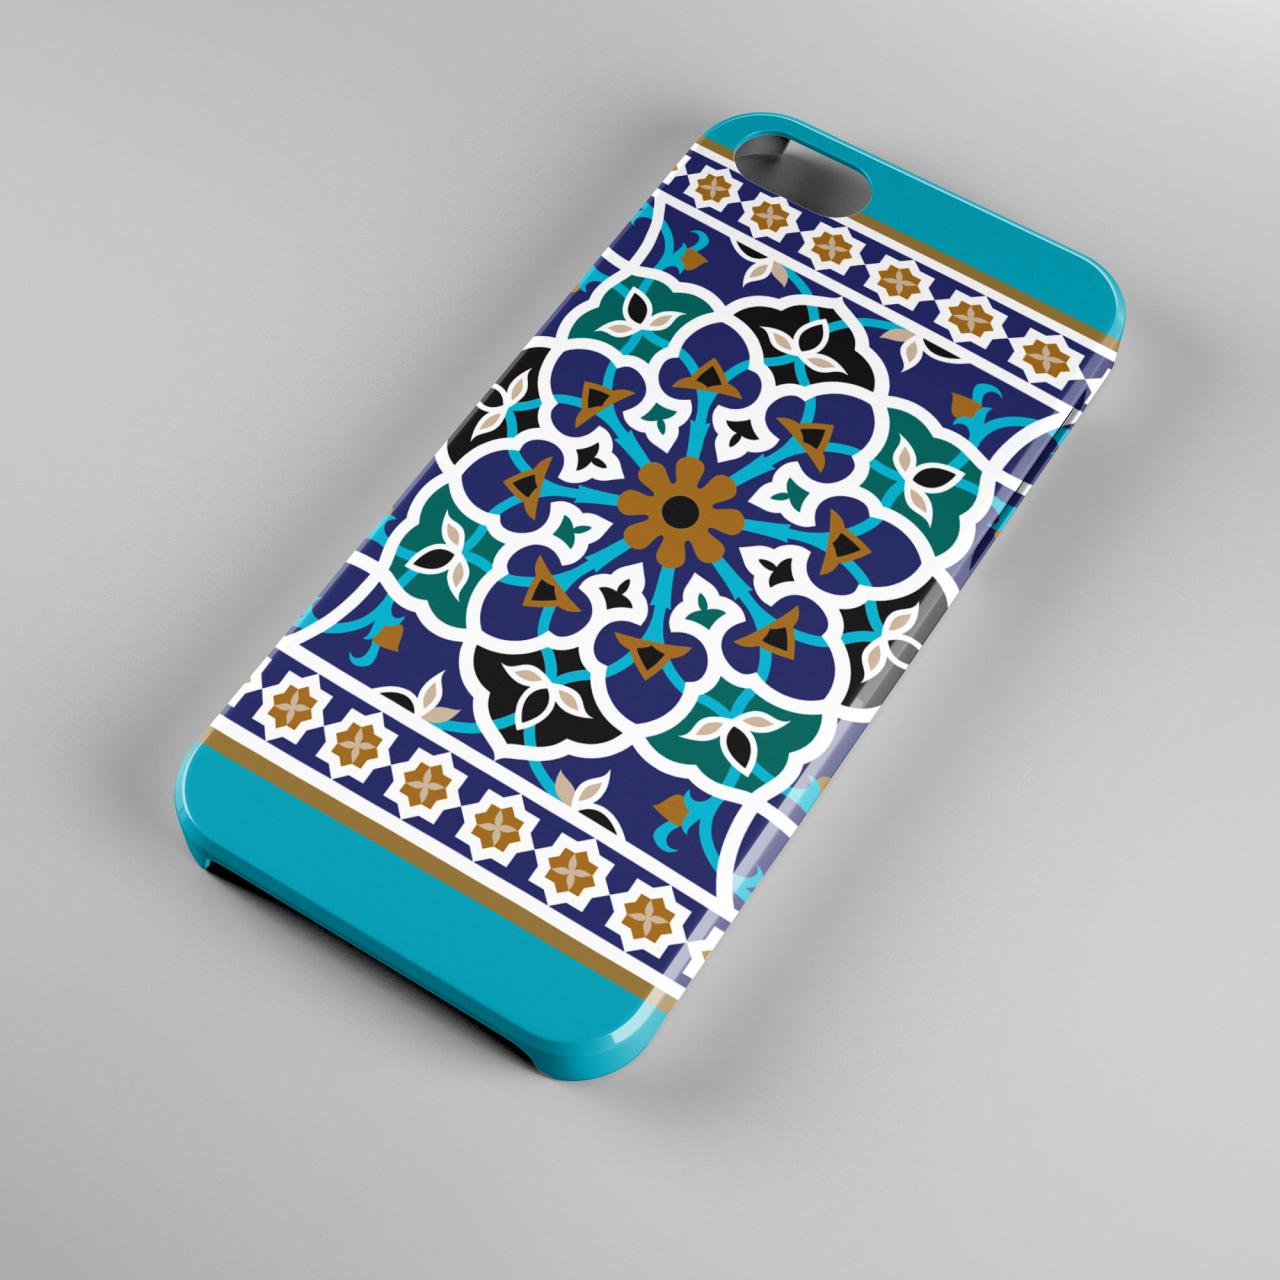 Indian Pattern Turquoise Iphone 6 Plus Iphone 6 Iphone 5s Iphone 5c Iphone 4s Samsung Galaxy S5 Samsung Galaxy S4 Case